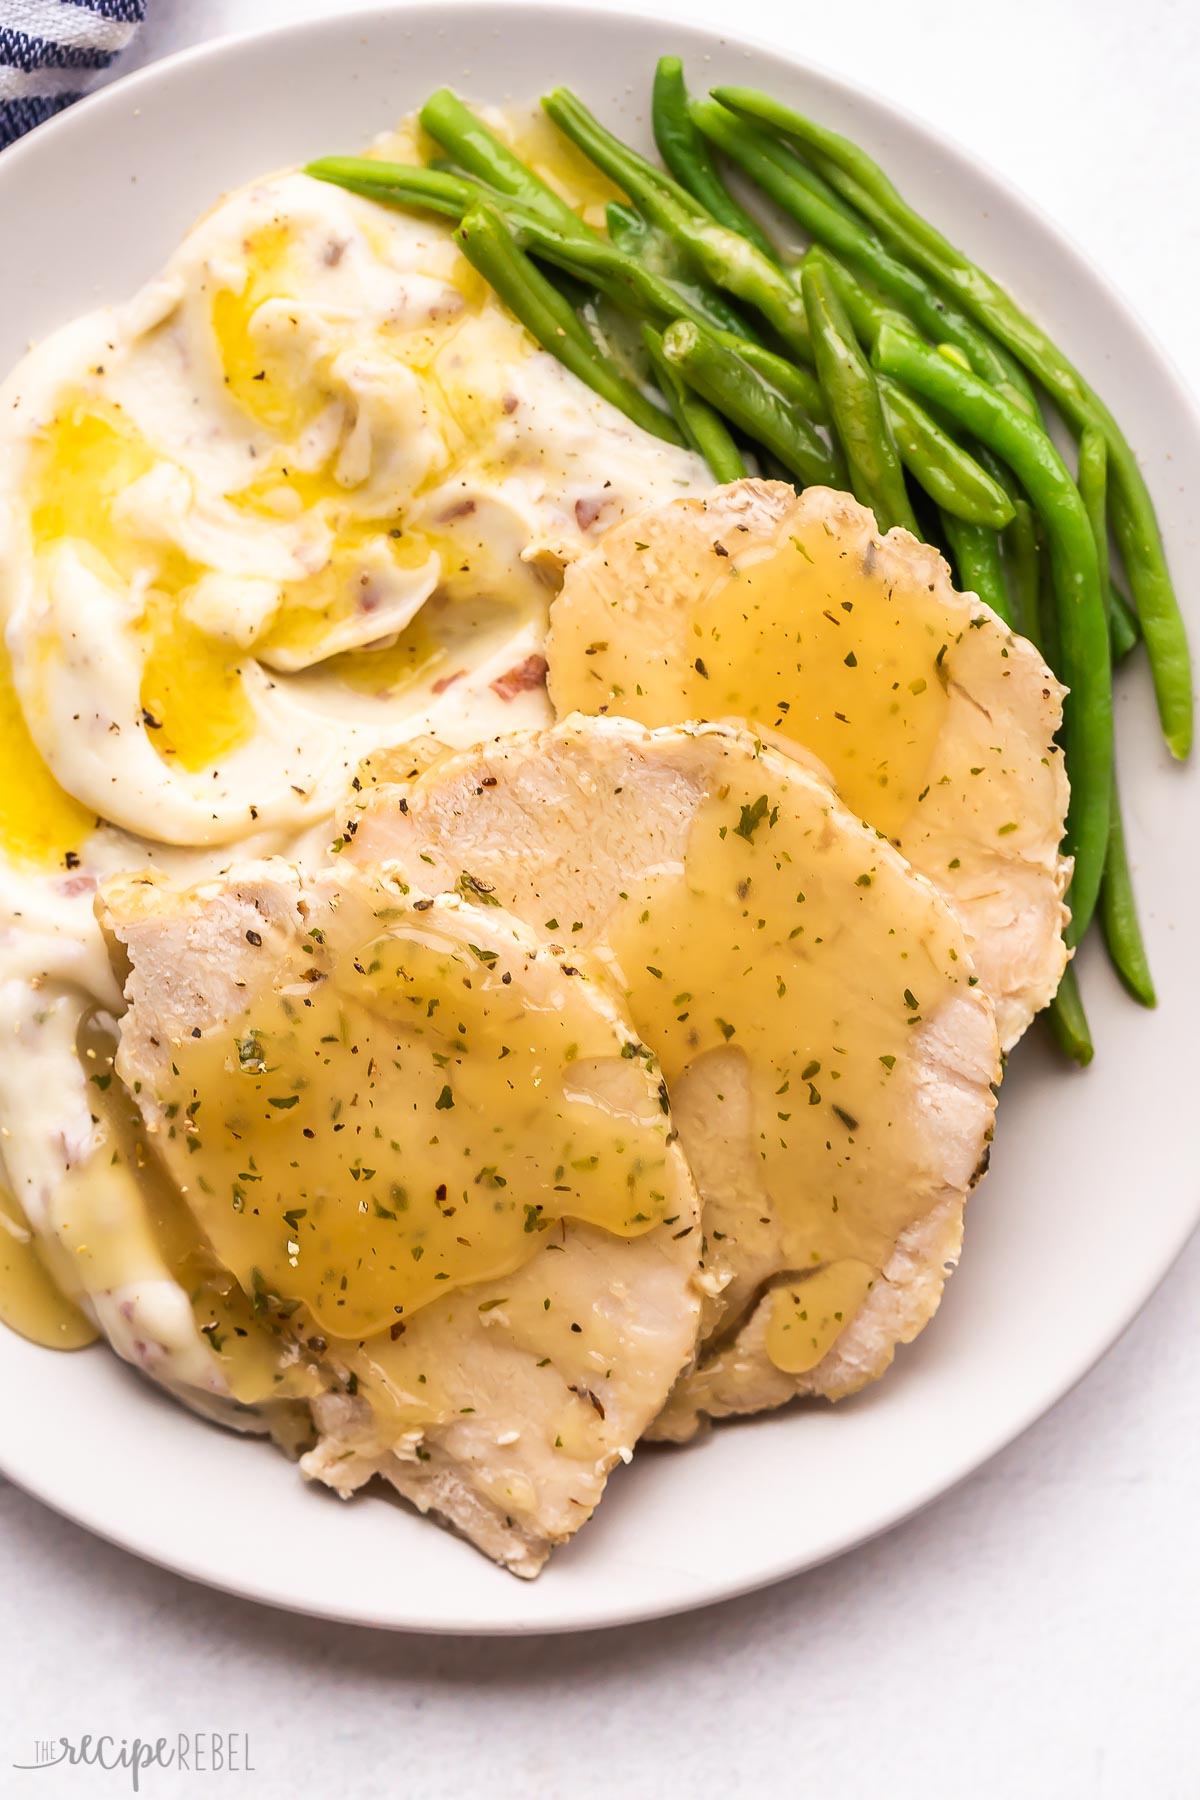 three slices of turkey breast on plate with mashed potatoes and green beans.